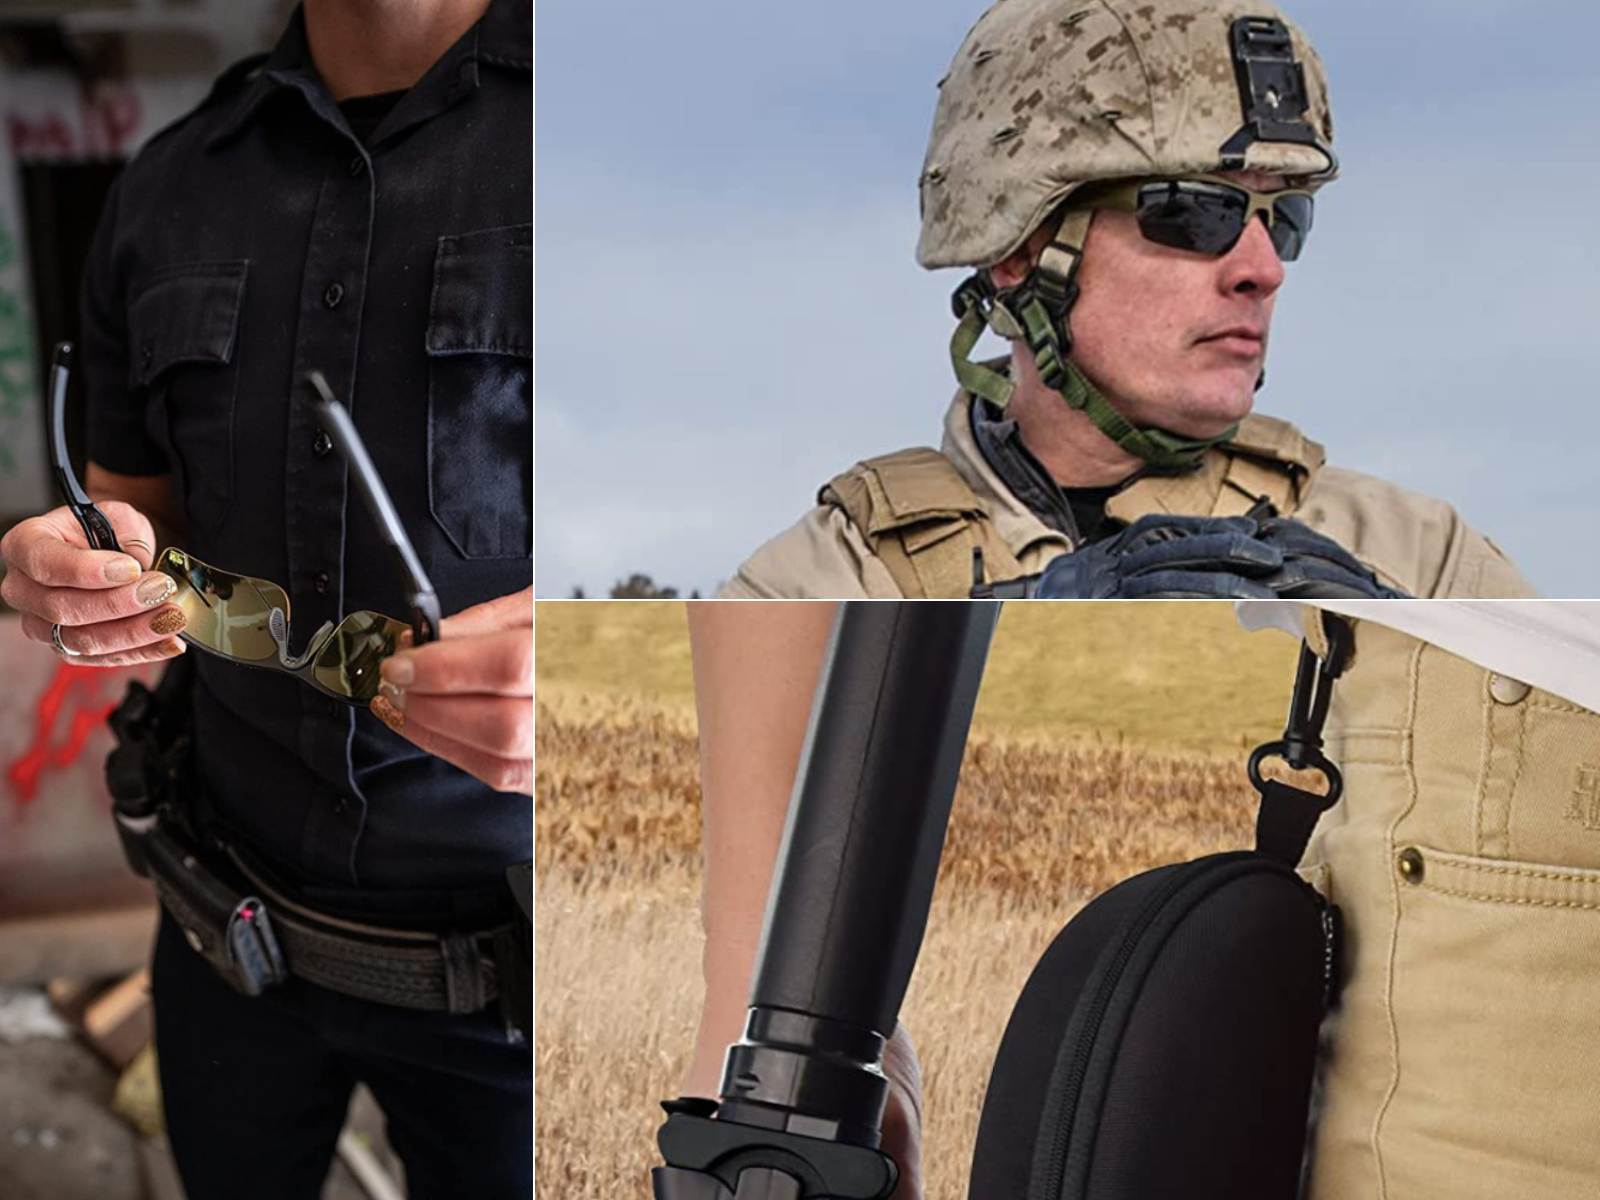 A military man wearing tinted shooting glasses, a man has them in a case on his belt, and the other is putting them on.